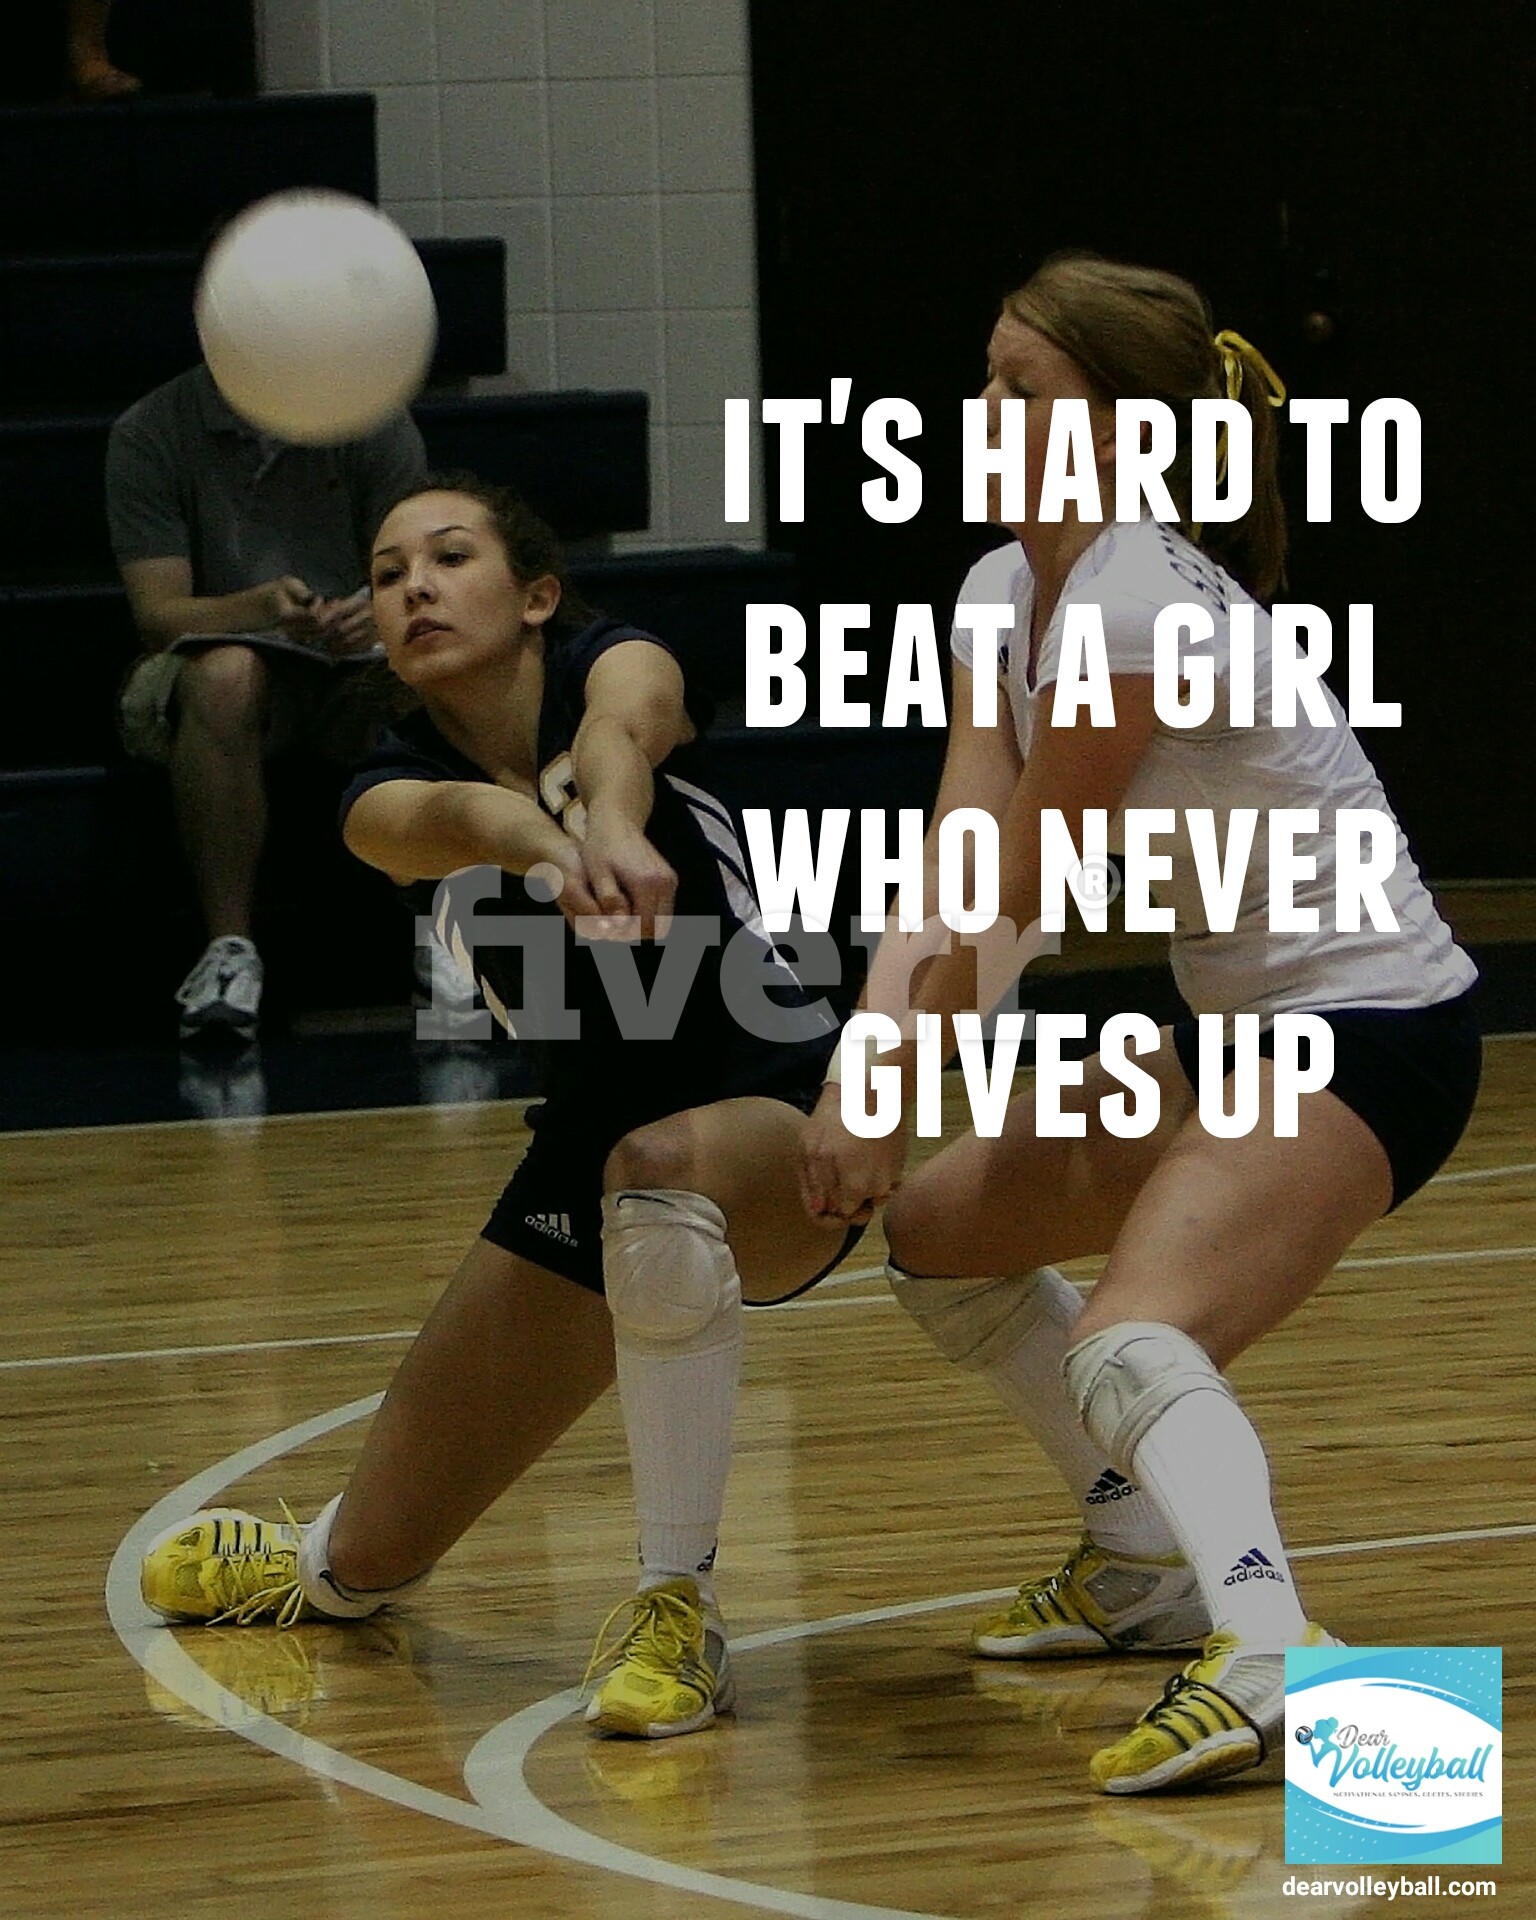 The Volleyball Quote My Club Players Were Most Inspired By